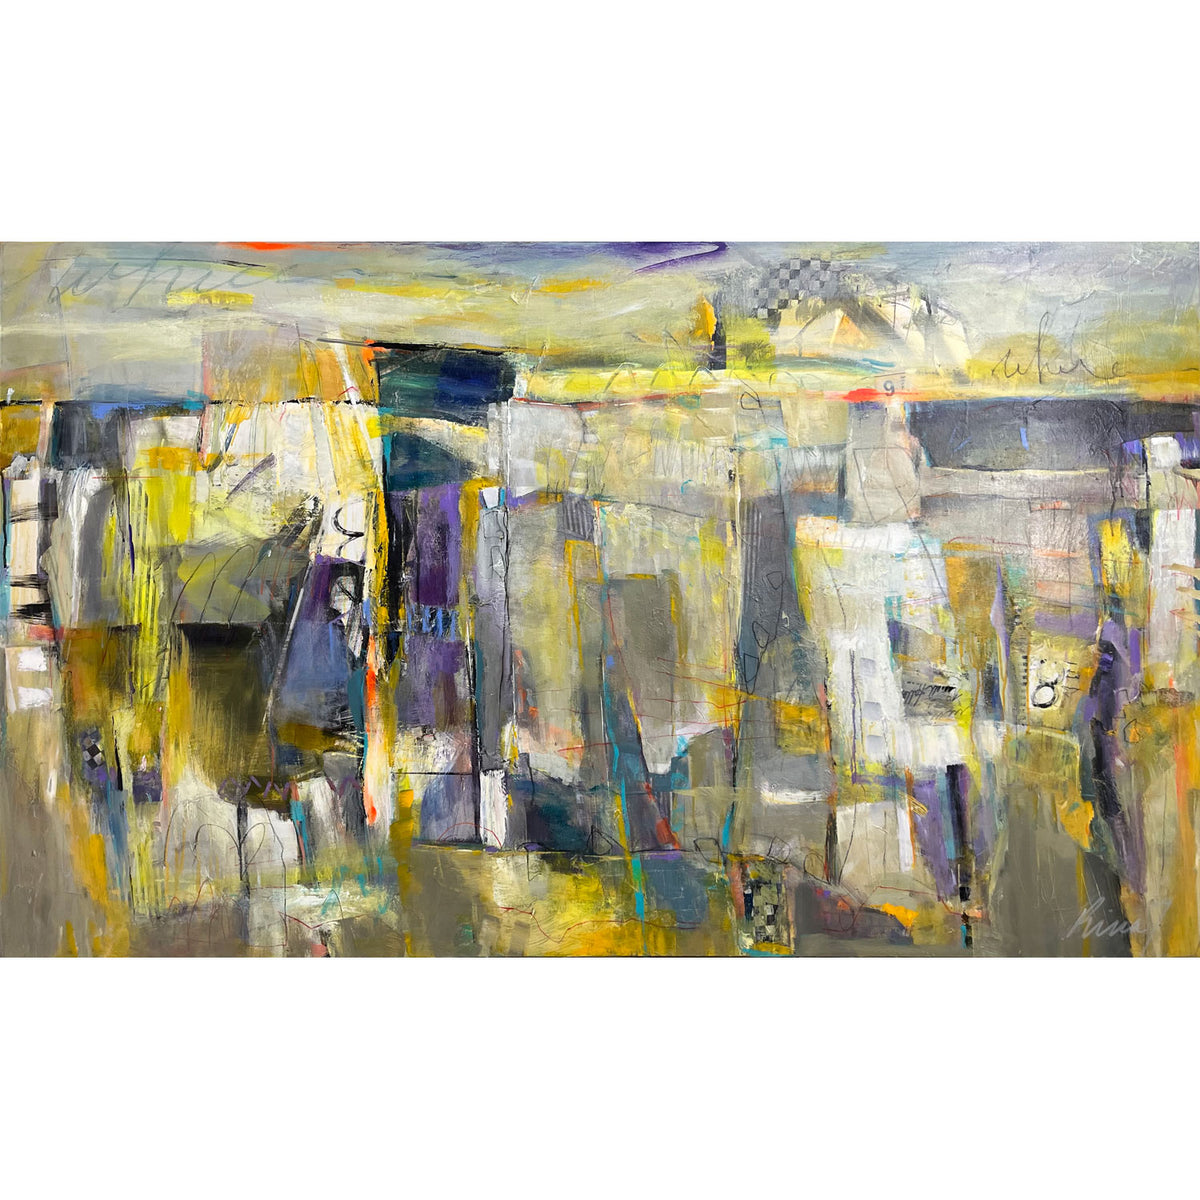 Rina Gottesman - Between Here And There, 36" x 60"